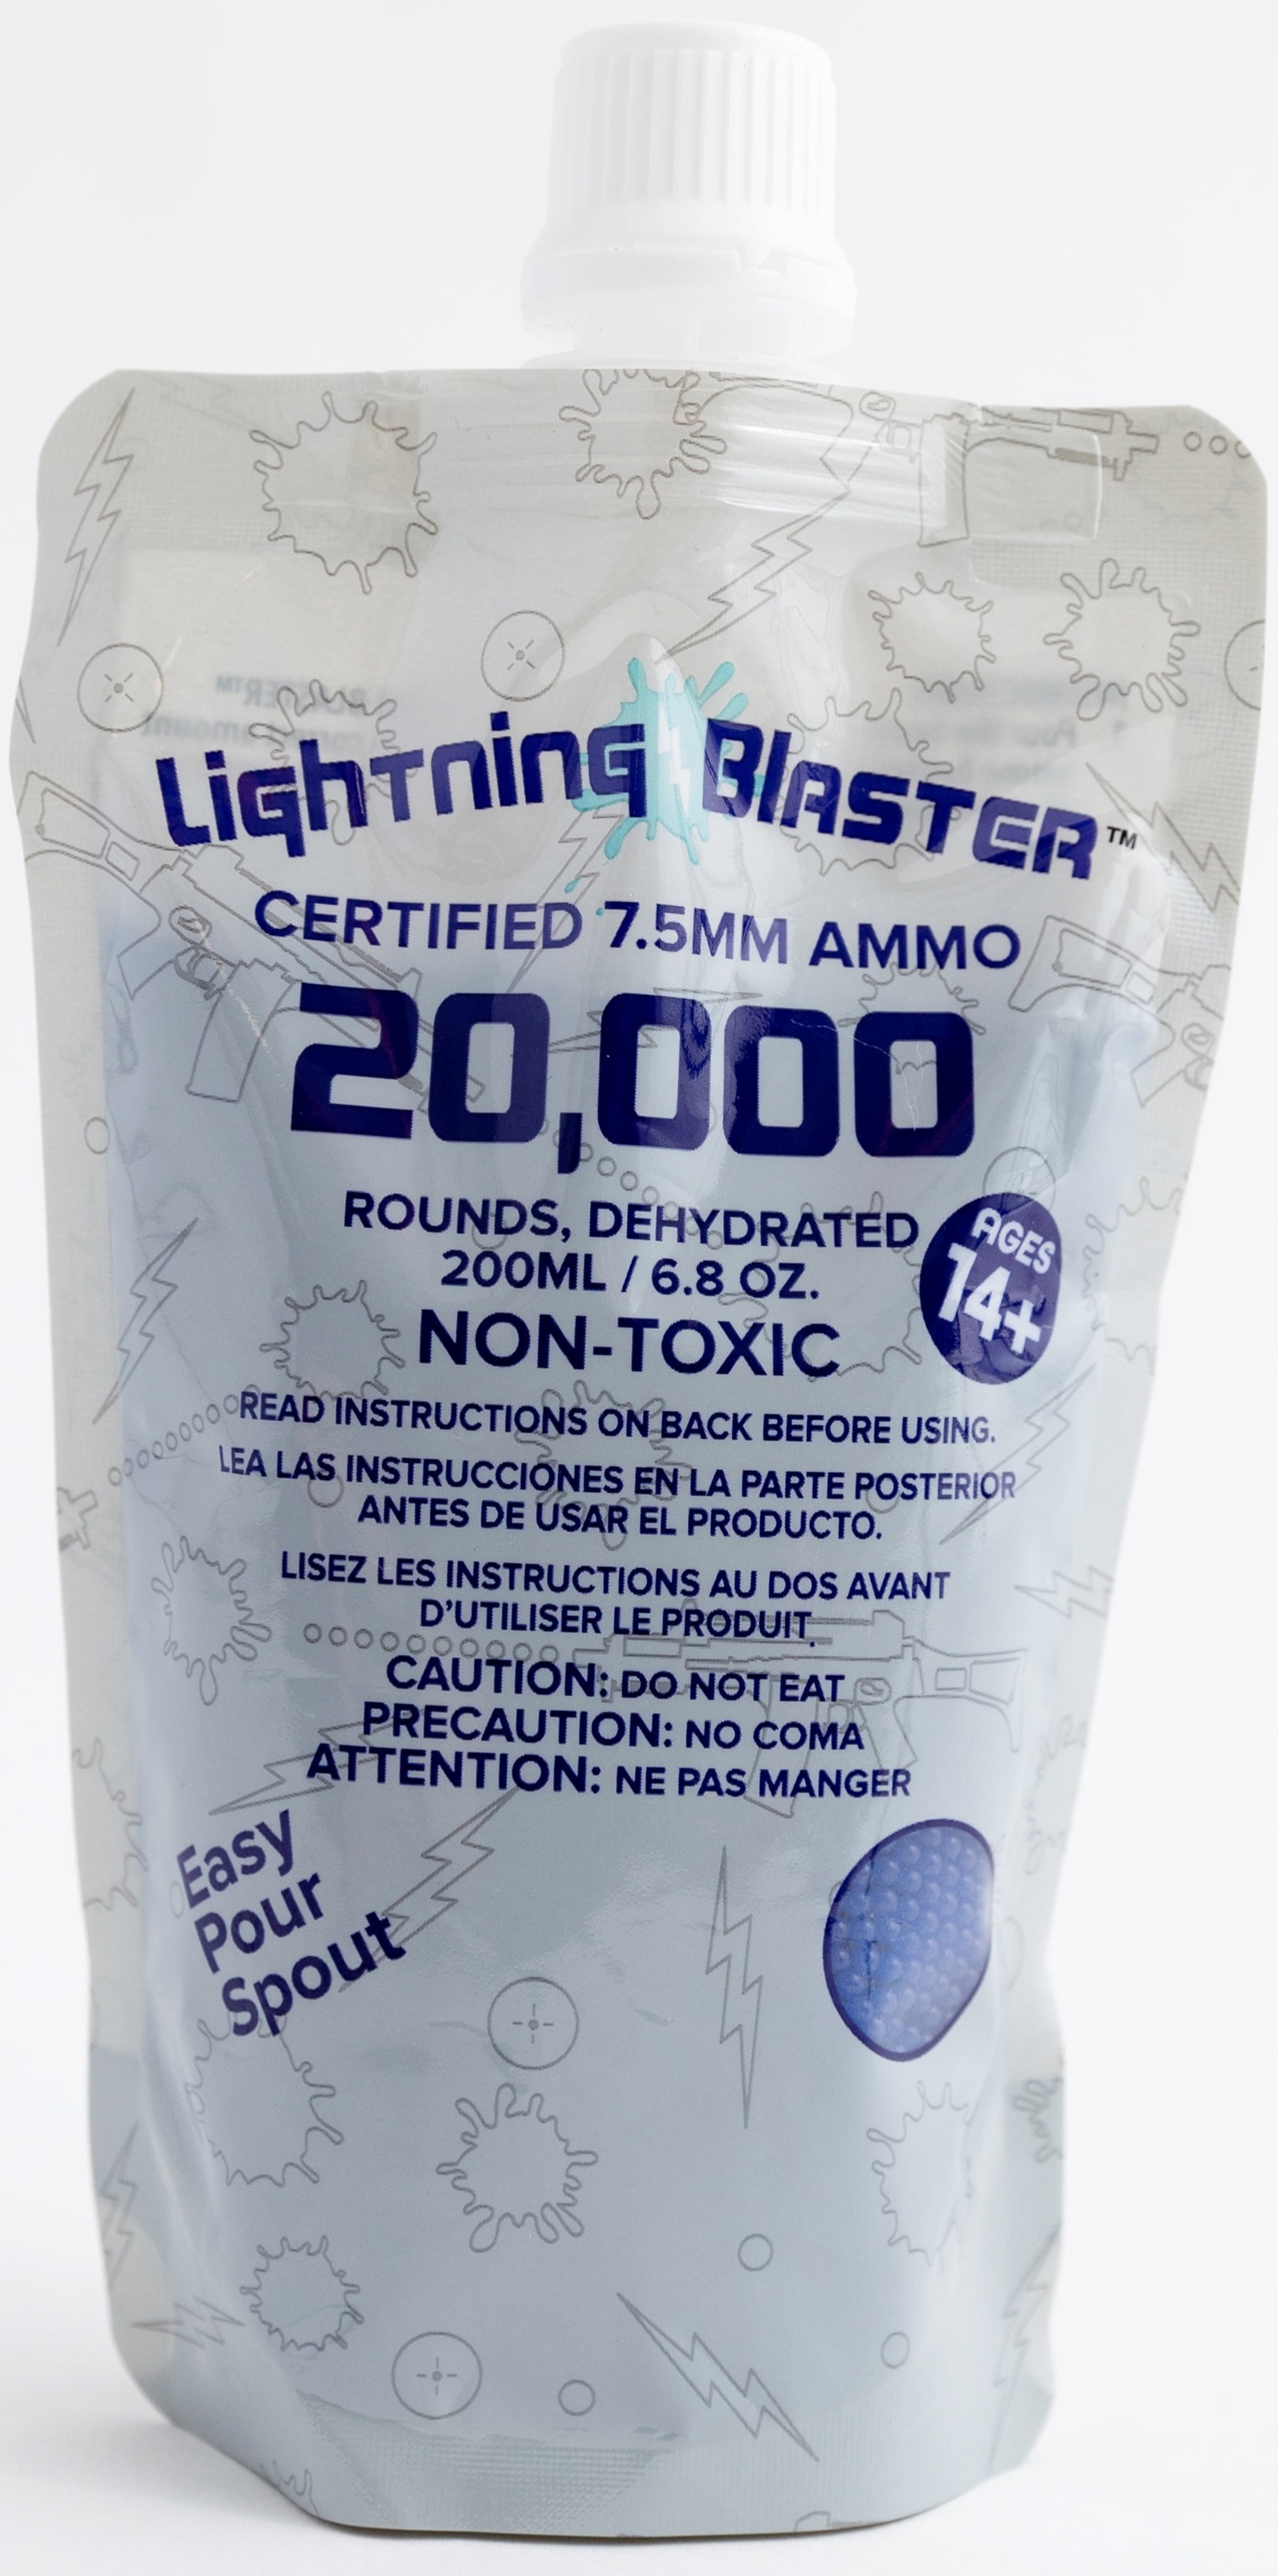 Lightning Blaster Blue Water Bead Ammo 20K Refill 7.5mm in Pour Nozzle Bag Age 14+ $1.50